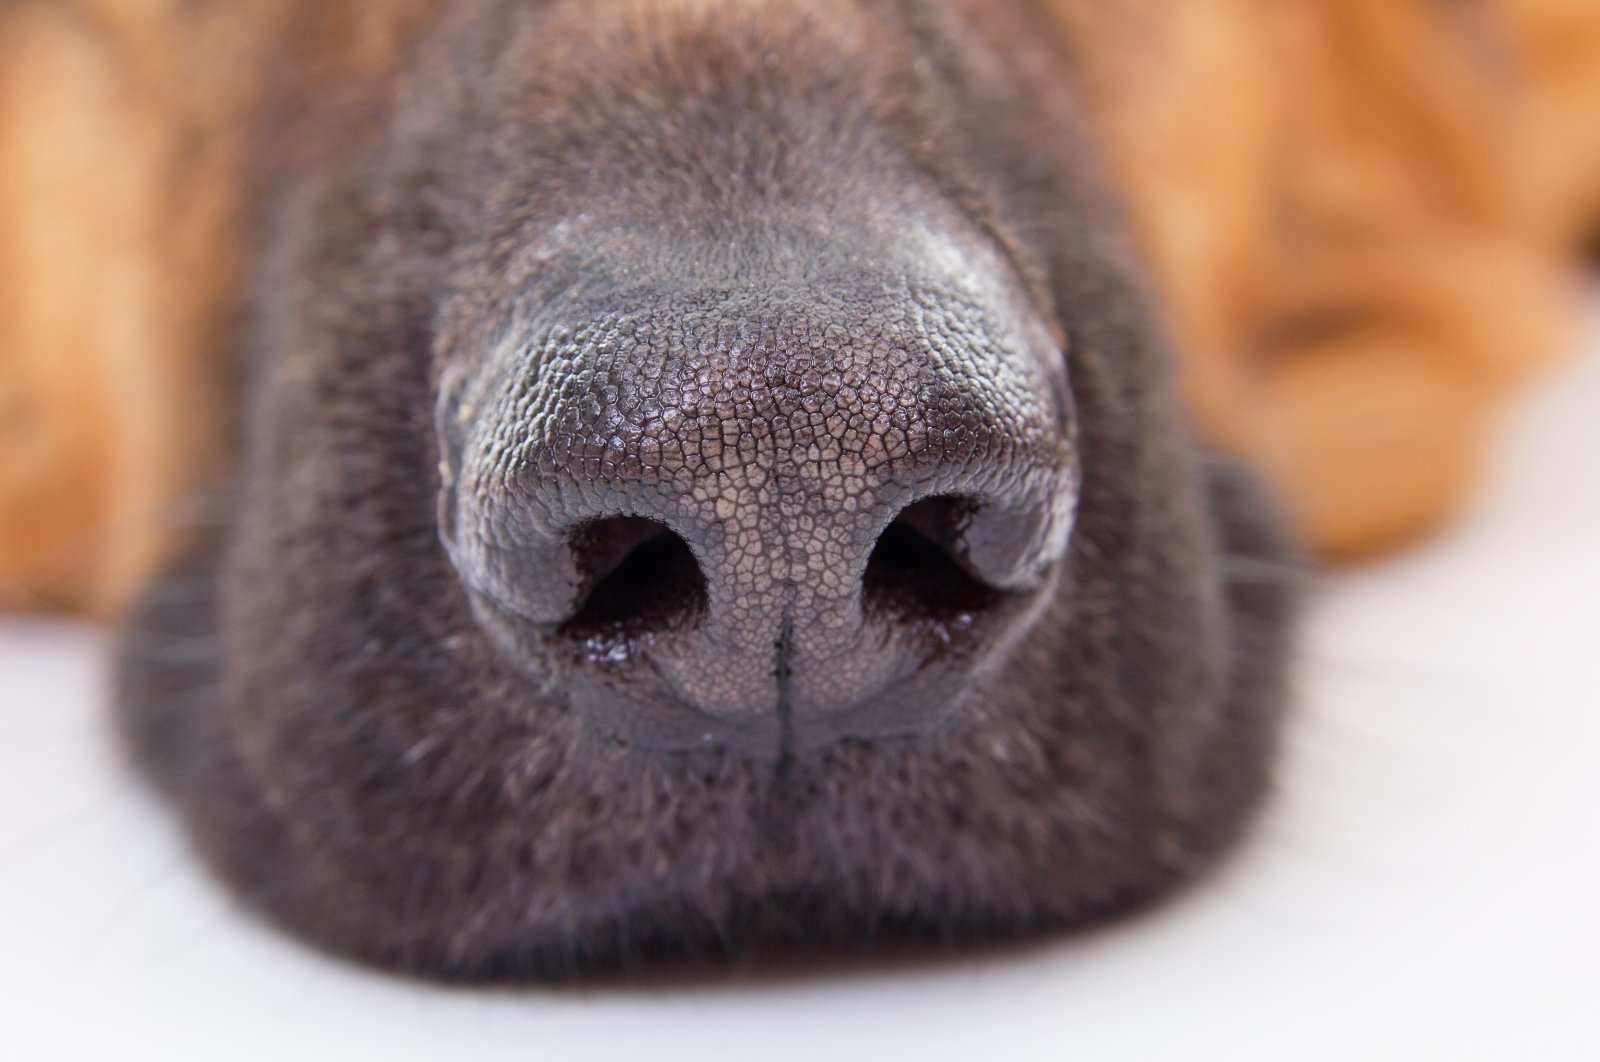 Dogs, with their extraordinary sense of smell, have been put to use in some public spaces such as airports during the pandemic to help reduce infections. (Shutterstock Photo) 